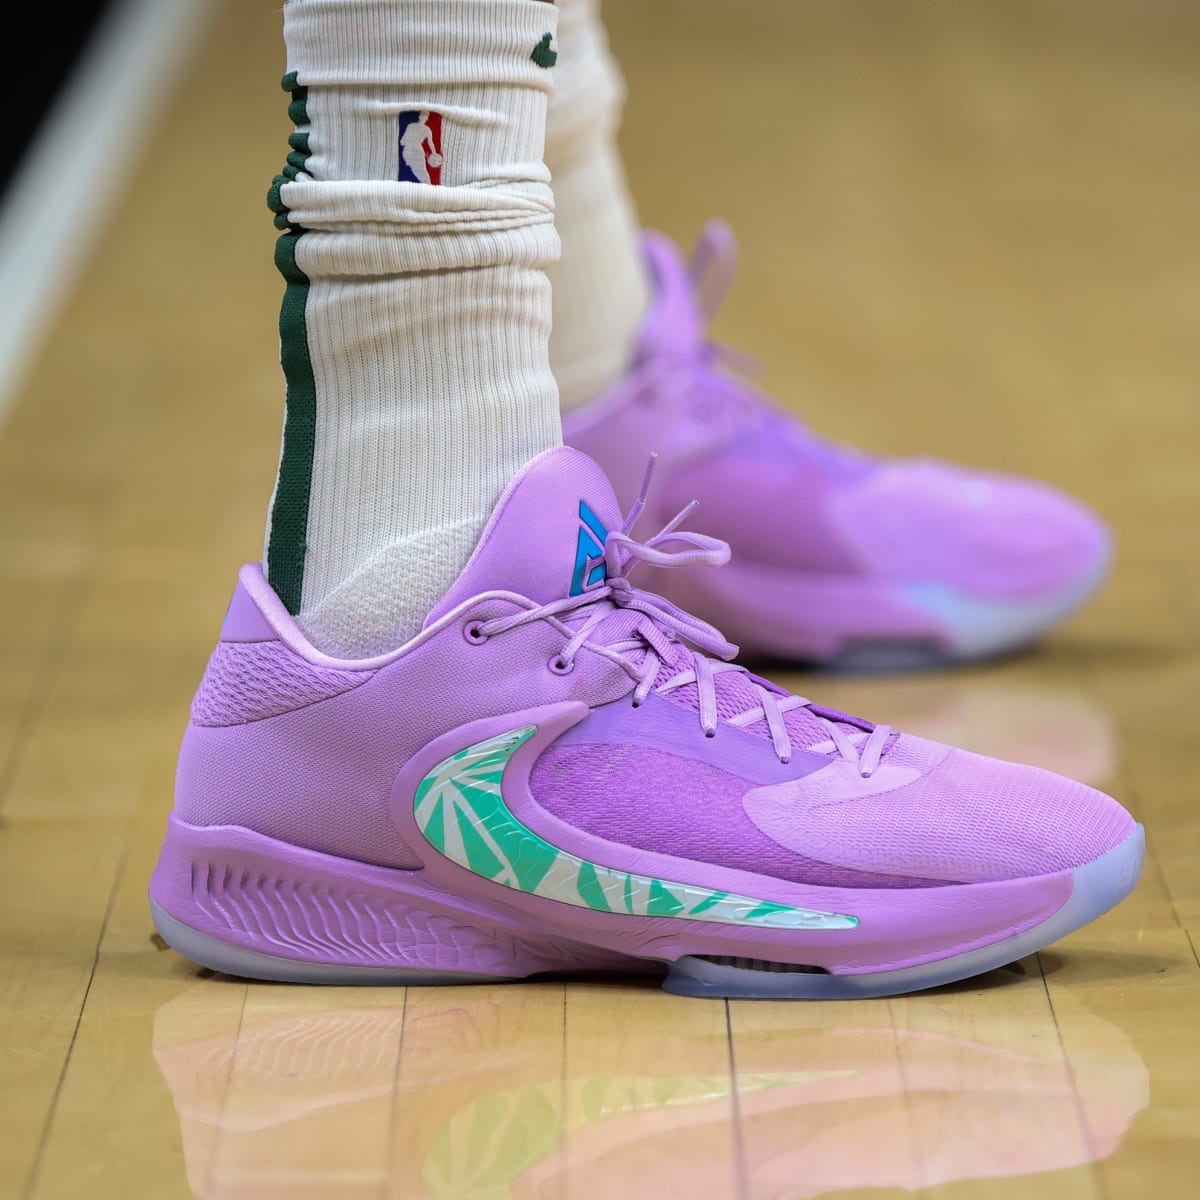 Buy adidas Trae Young Shoes & New Sneakers - StockX